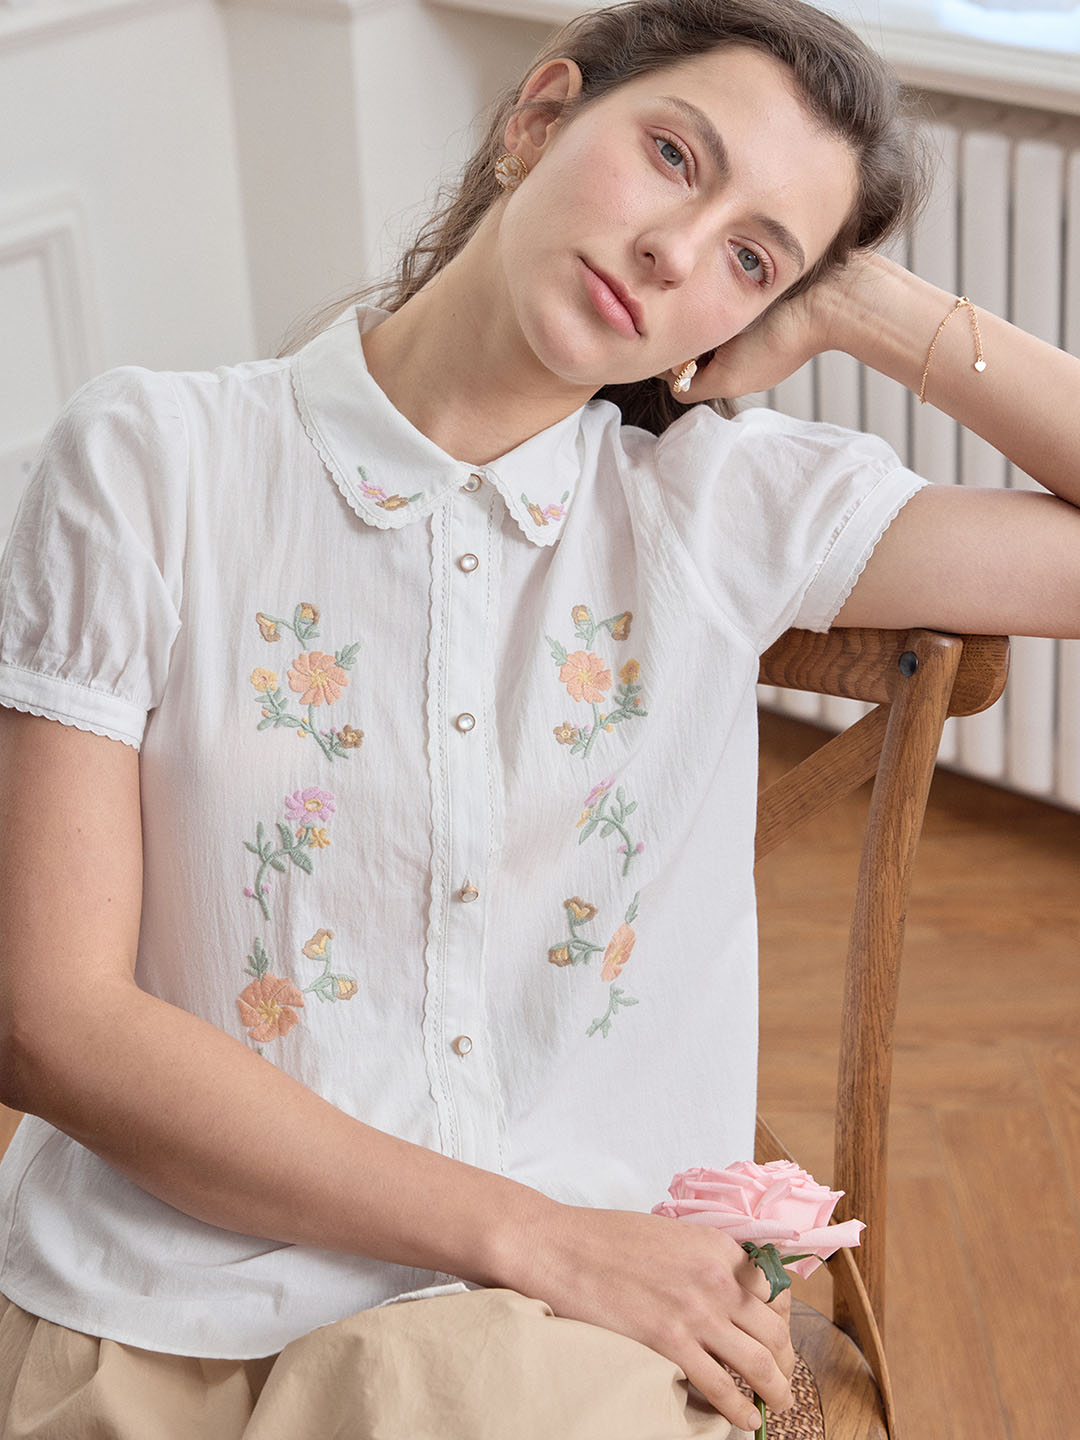 【Final Sale】Emmy Floral Embroidery Button Front Shirt